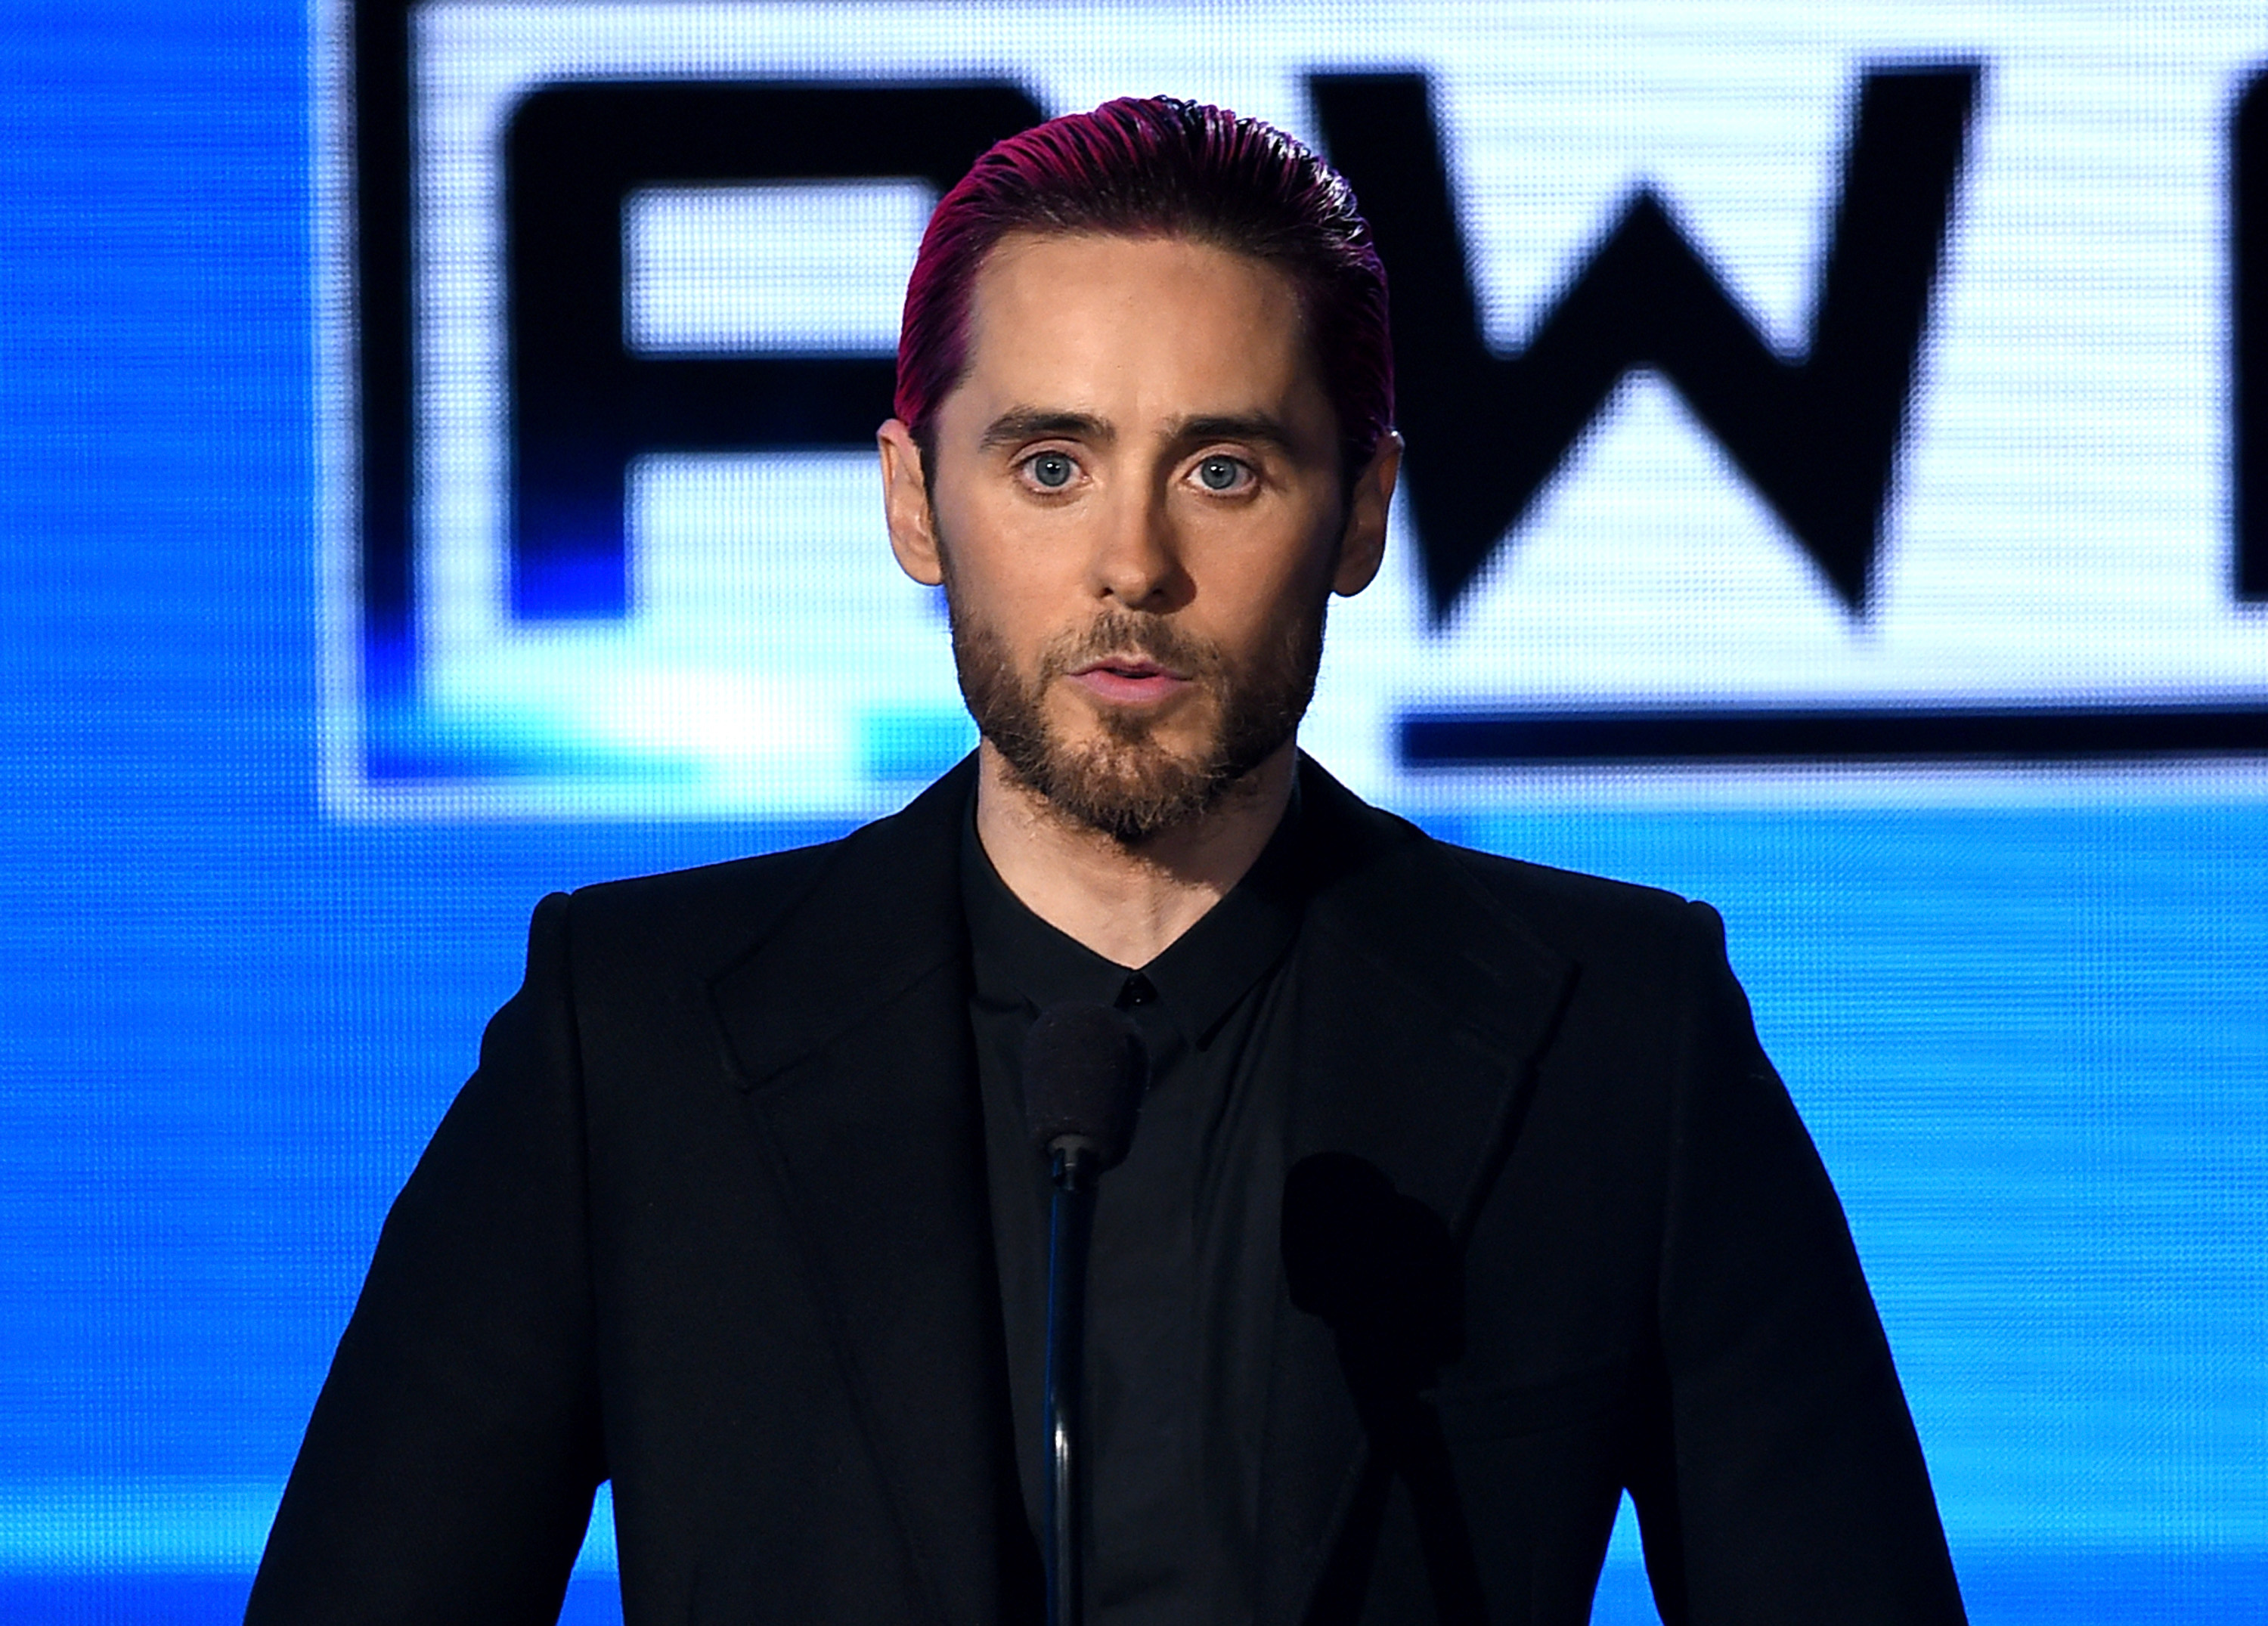 Jared Leto performs onstage during the 2015 American Music Awards at Microsoft Theater on November 22, 2015 in Los Angeles, California. (Kevin Winter—Getty Images)